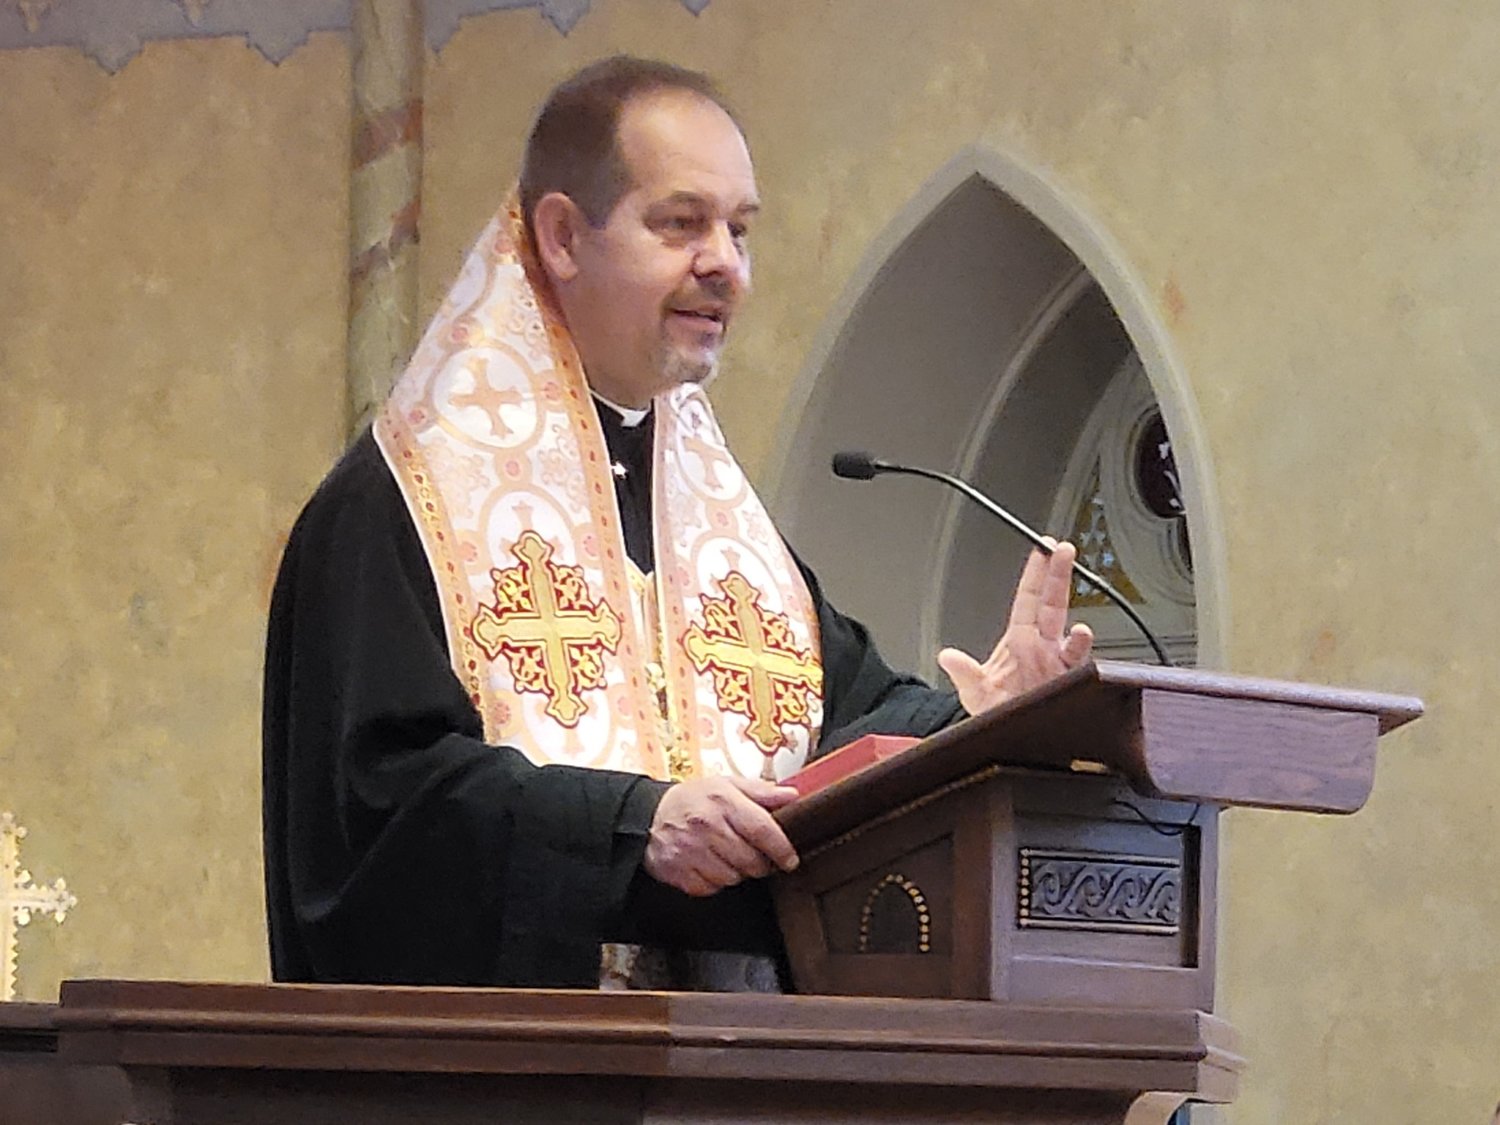 Ukrainian Greek Catholic Bishop Bohdan J. Danylo of the Eparchy of Saint Josephat in Parma, Ohio, speaks to the students of St. Peter School in Jefferson City at the end of an all-school Mass on Oct. 6.